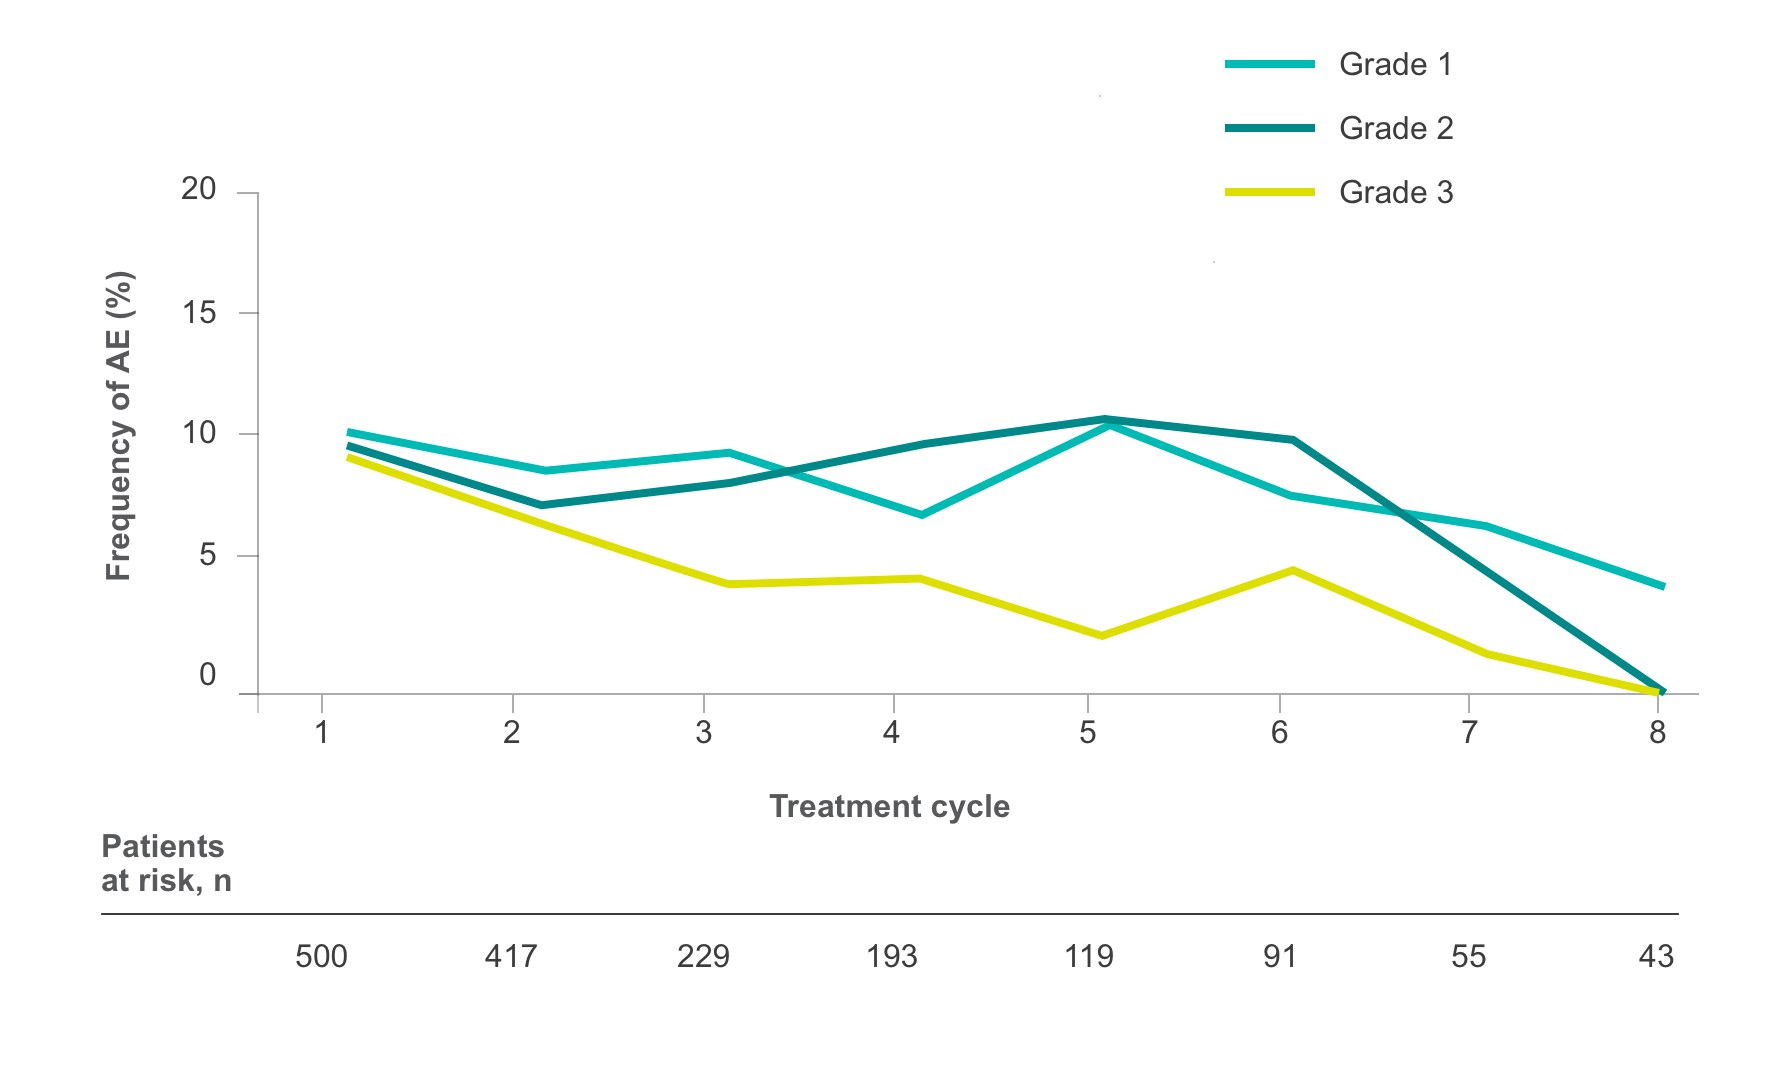 Line graph shows frequency levels of HFSR side effects in STIVARGA® (regorafenib) patients.